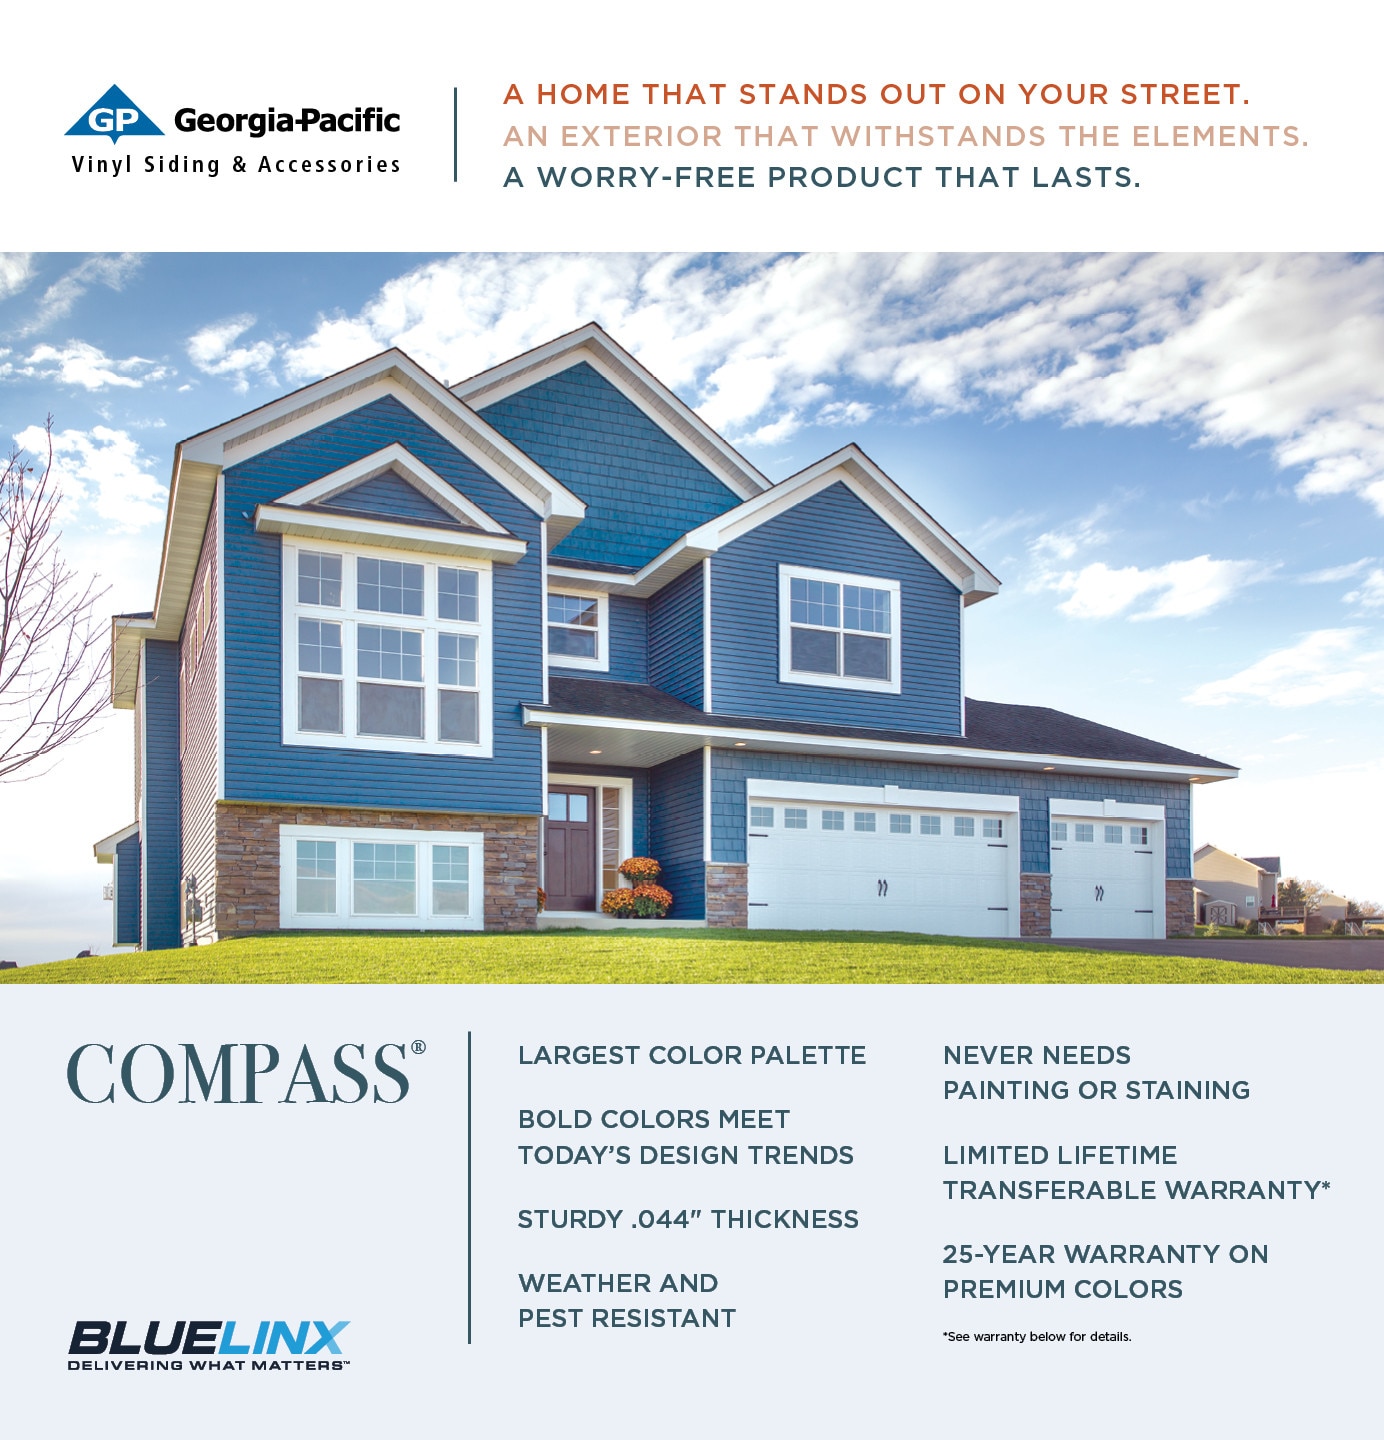 KP Vinyl Siding - Mystic Blue is a stunning blue shade fit for any home  exterior!